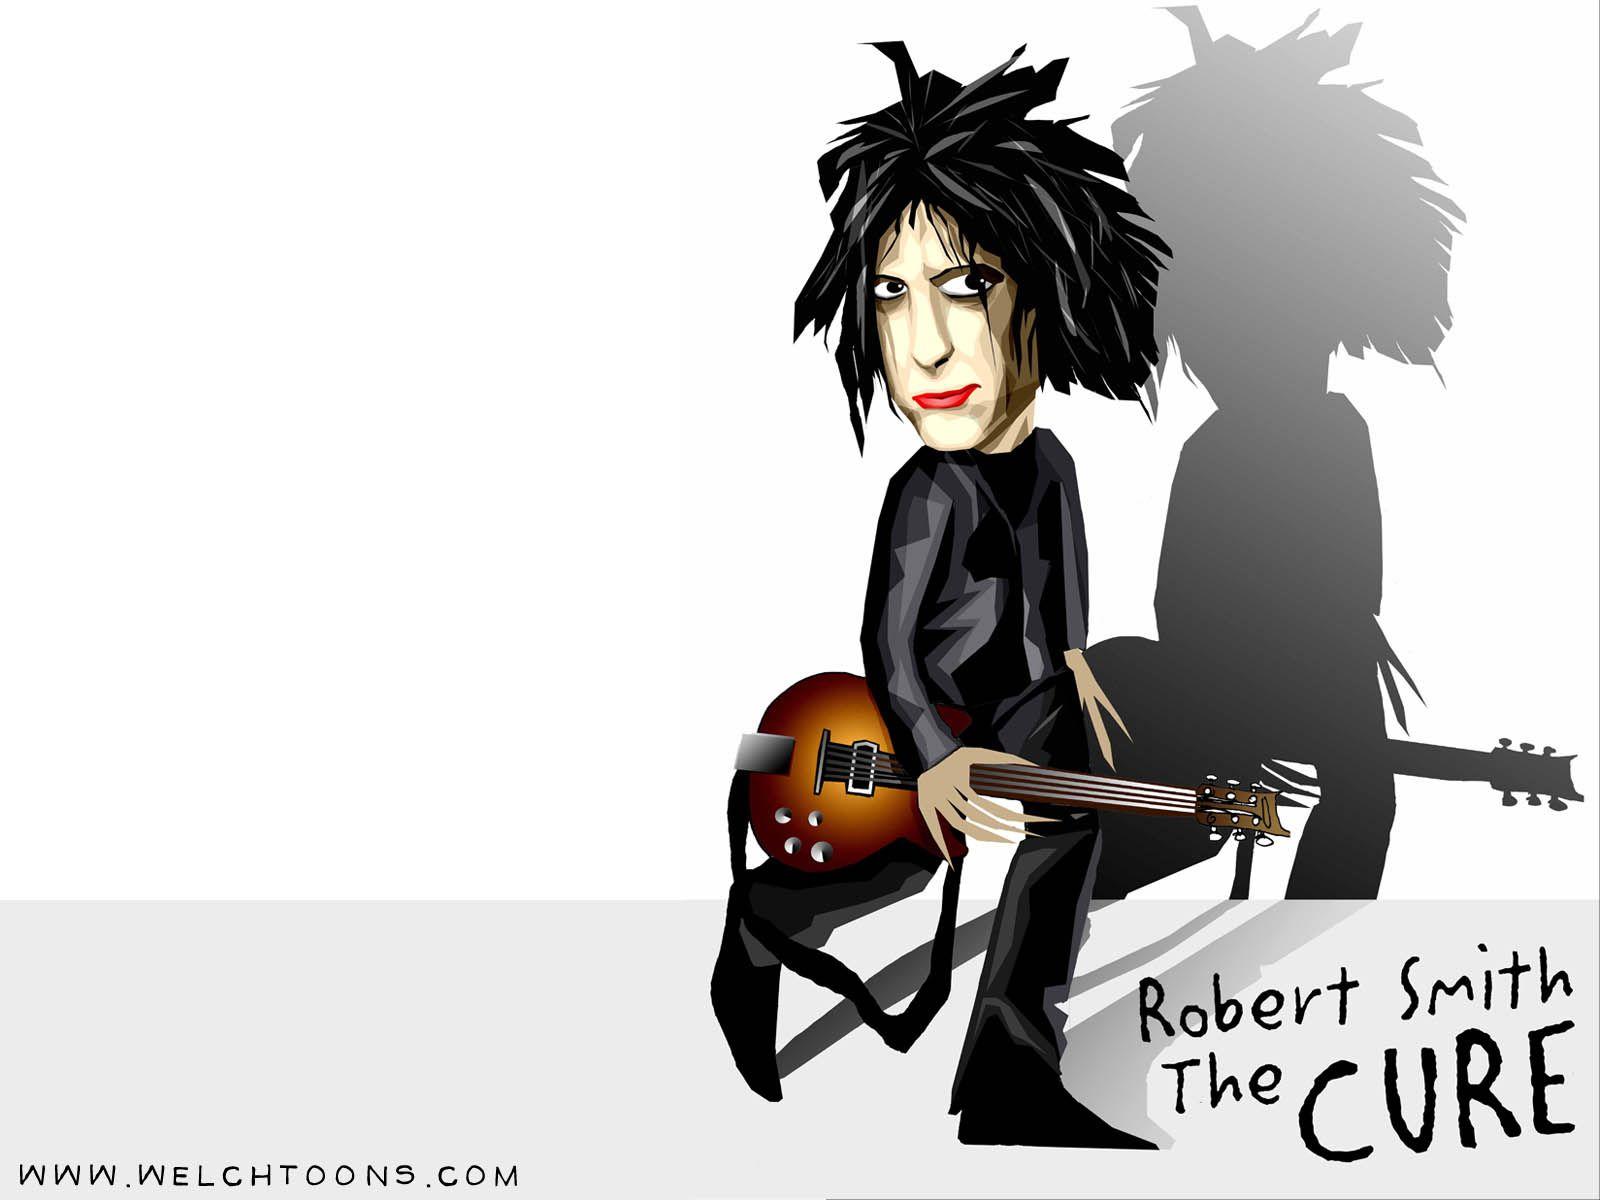 The Cure Wallpaper, HD Widescreen The Cure Wallpaper